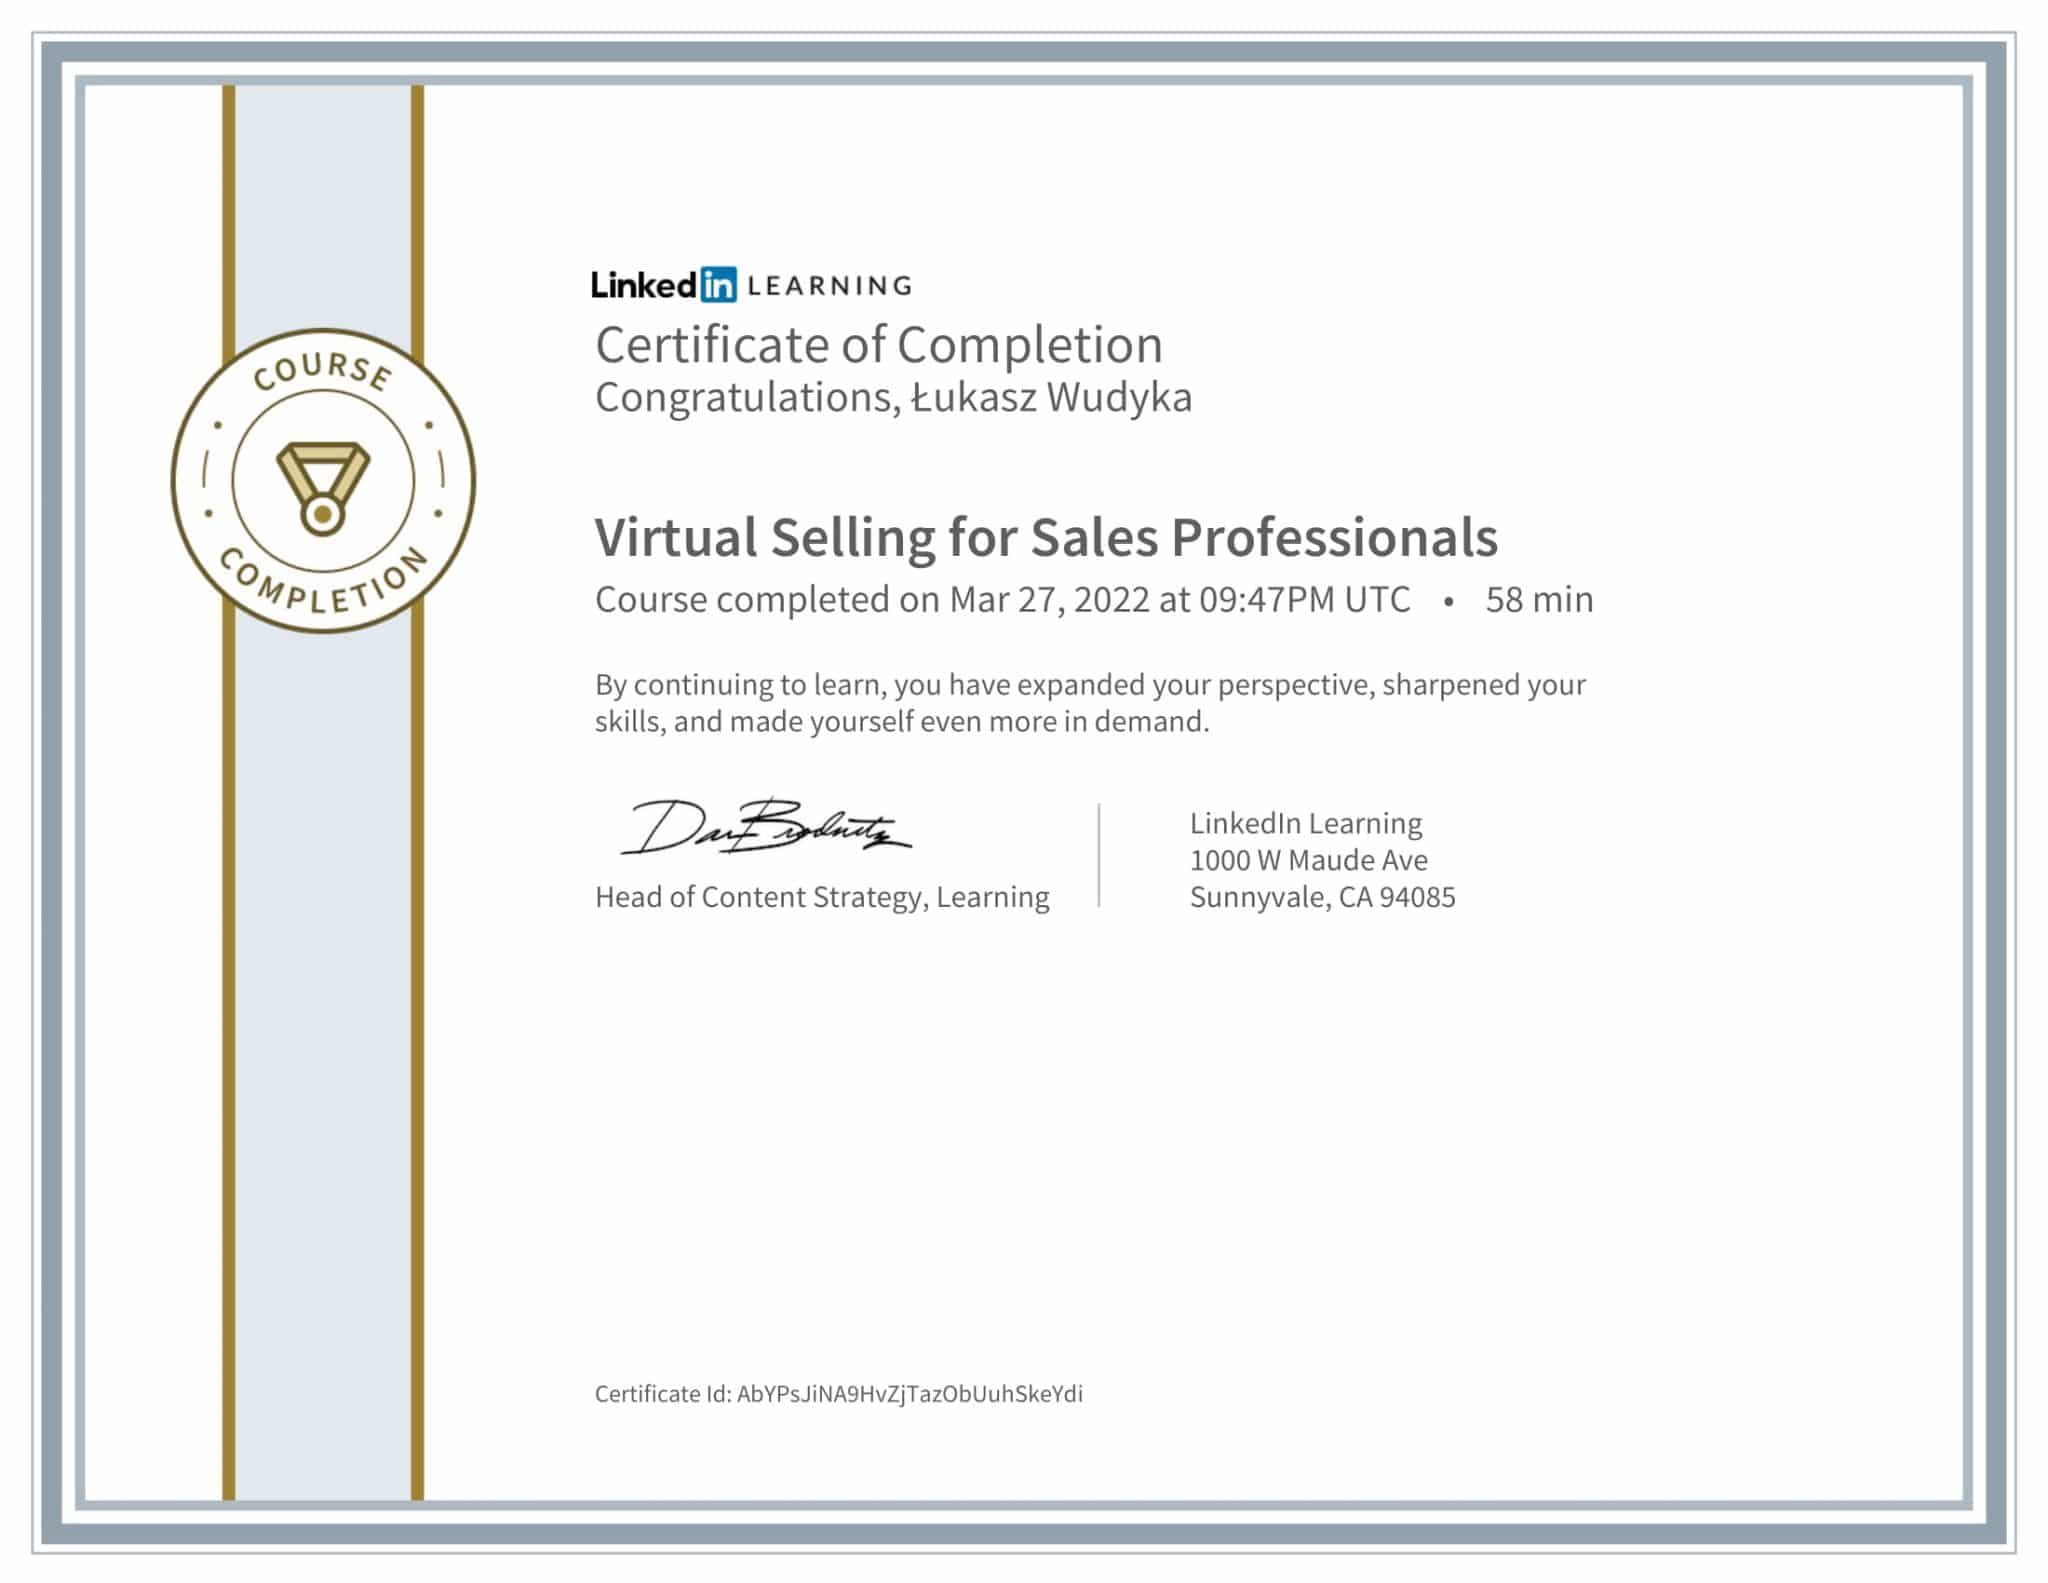 CertificateOfCompletion_Virtual Selling for Sales Professionals-1